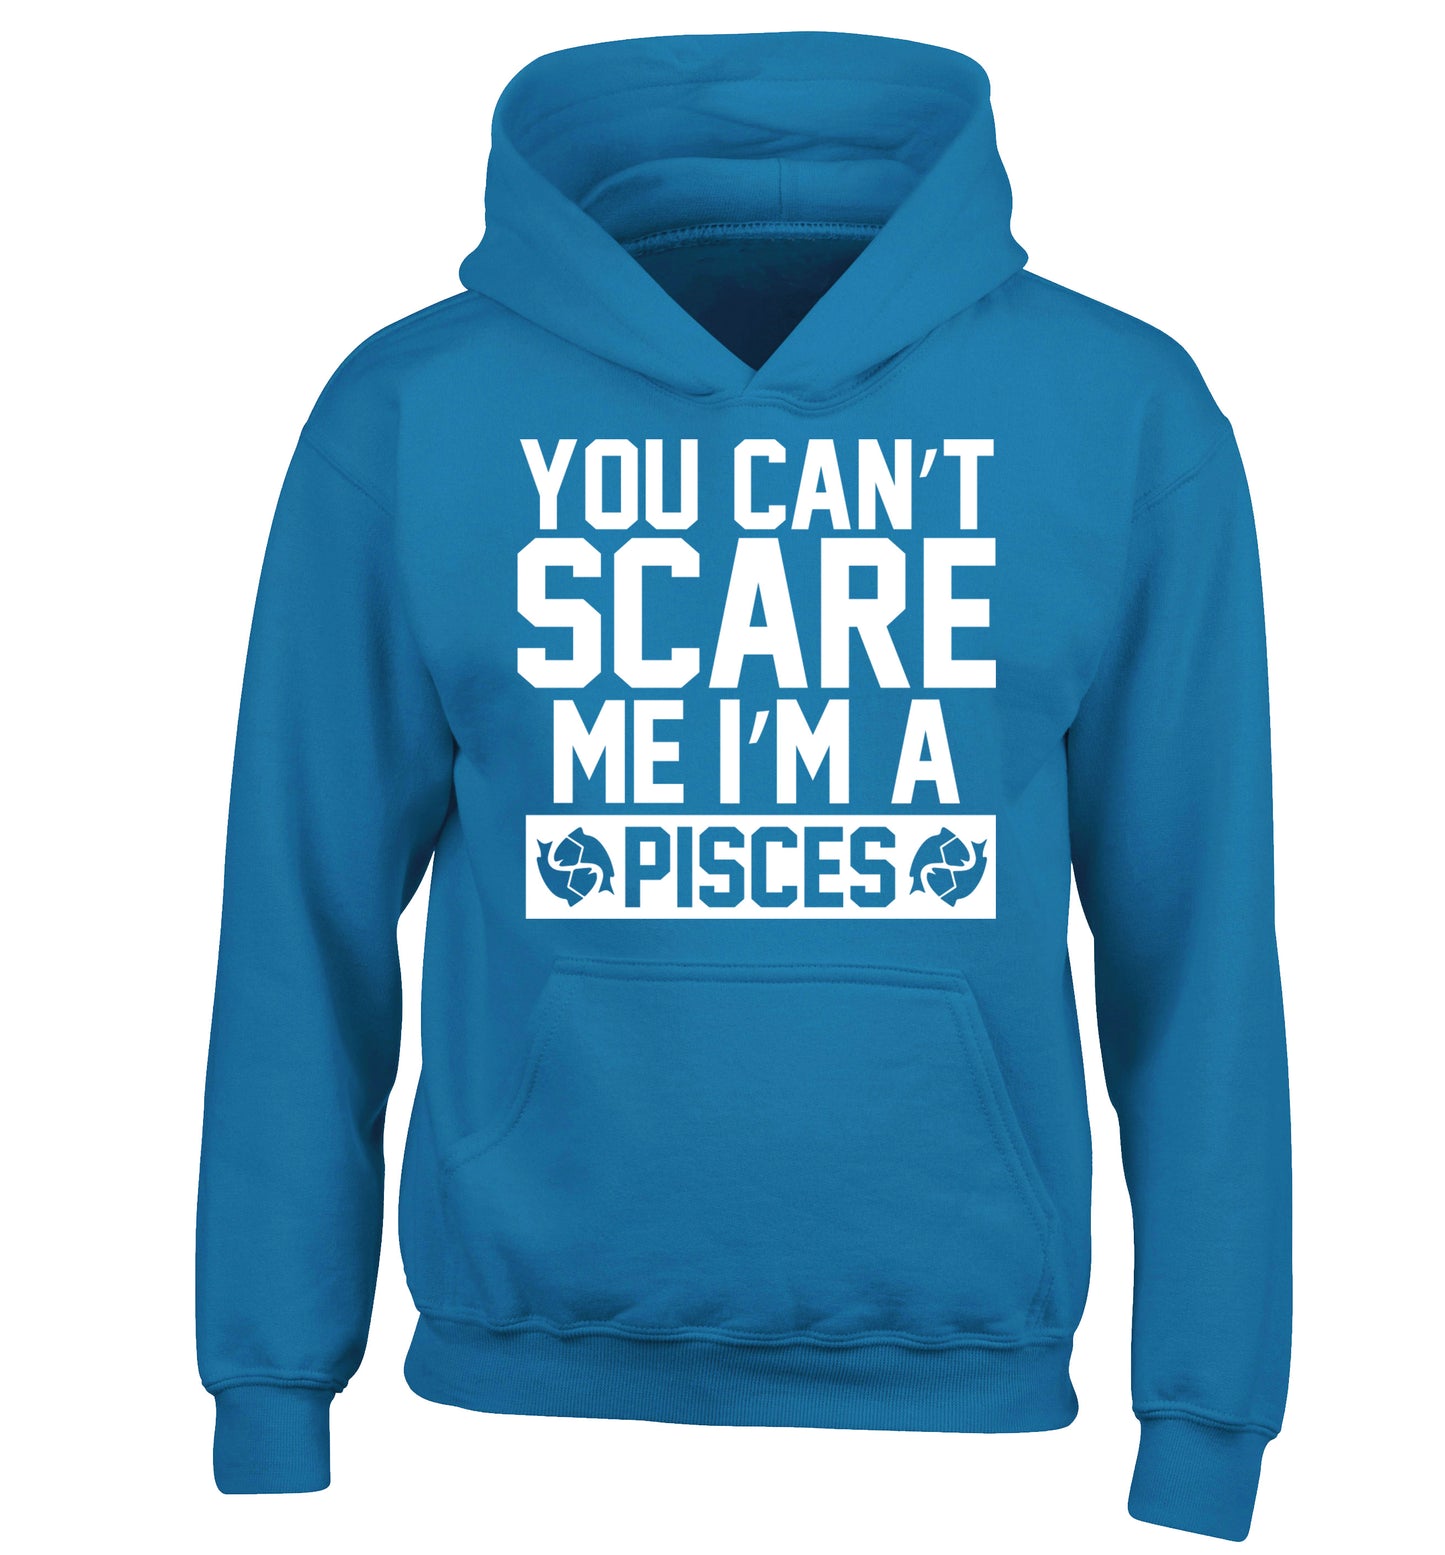 You can't scare me I'm a pisces children's blue hoodie 12-13 Years